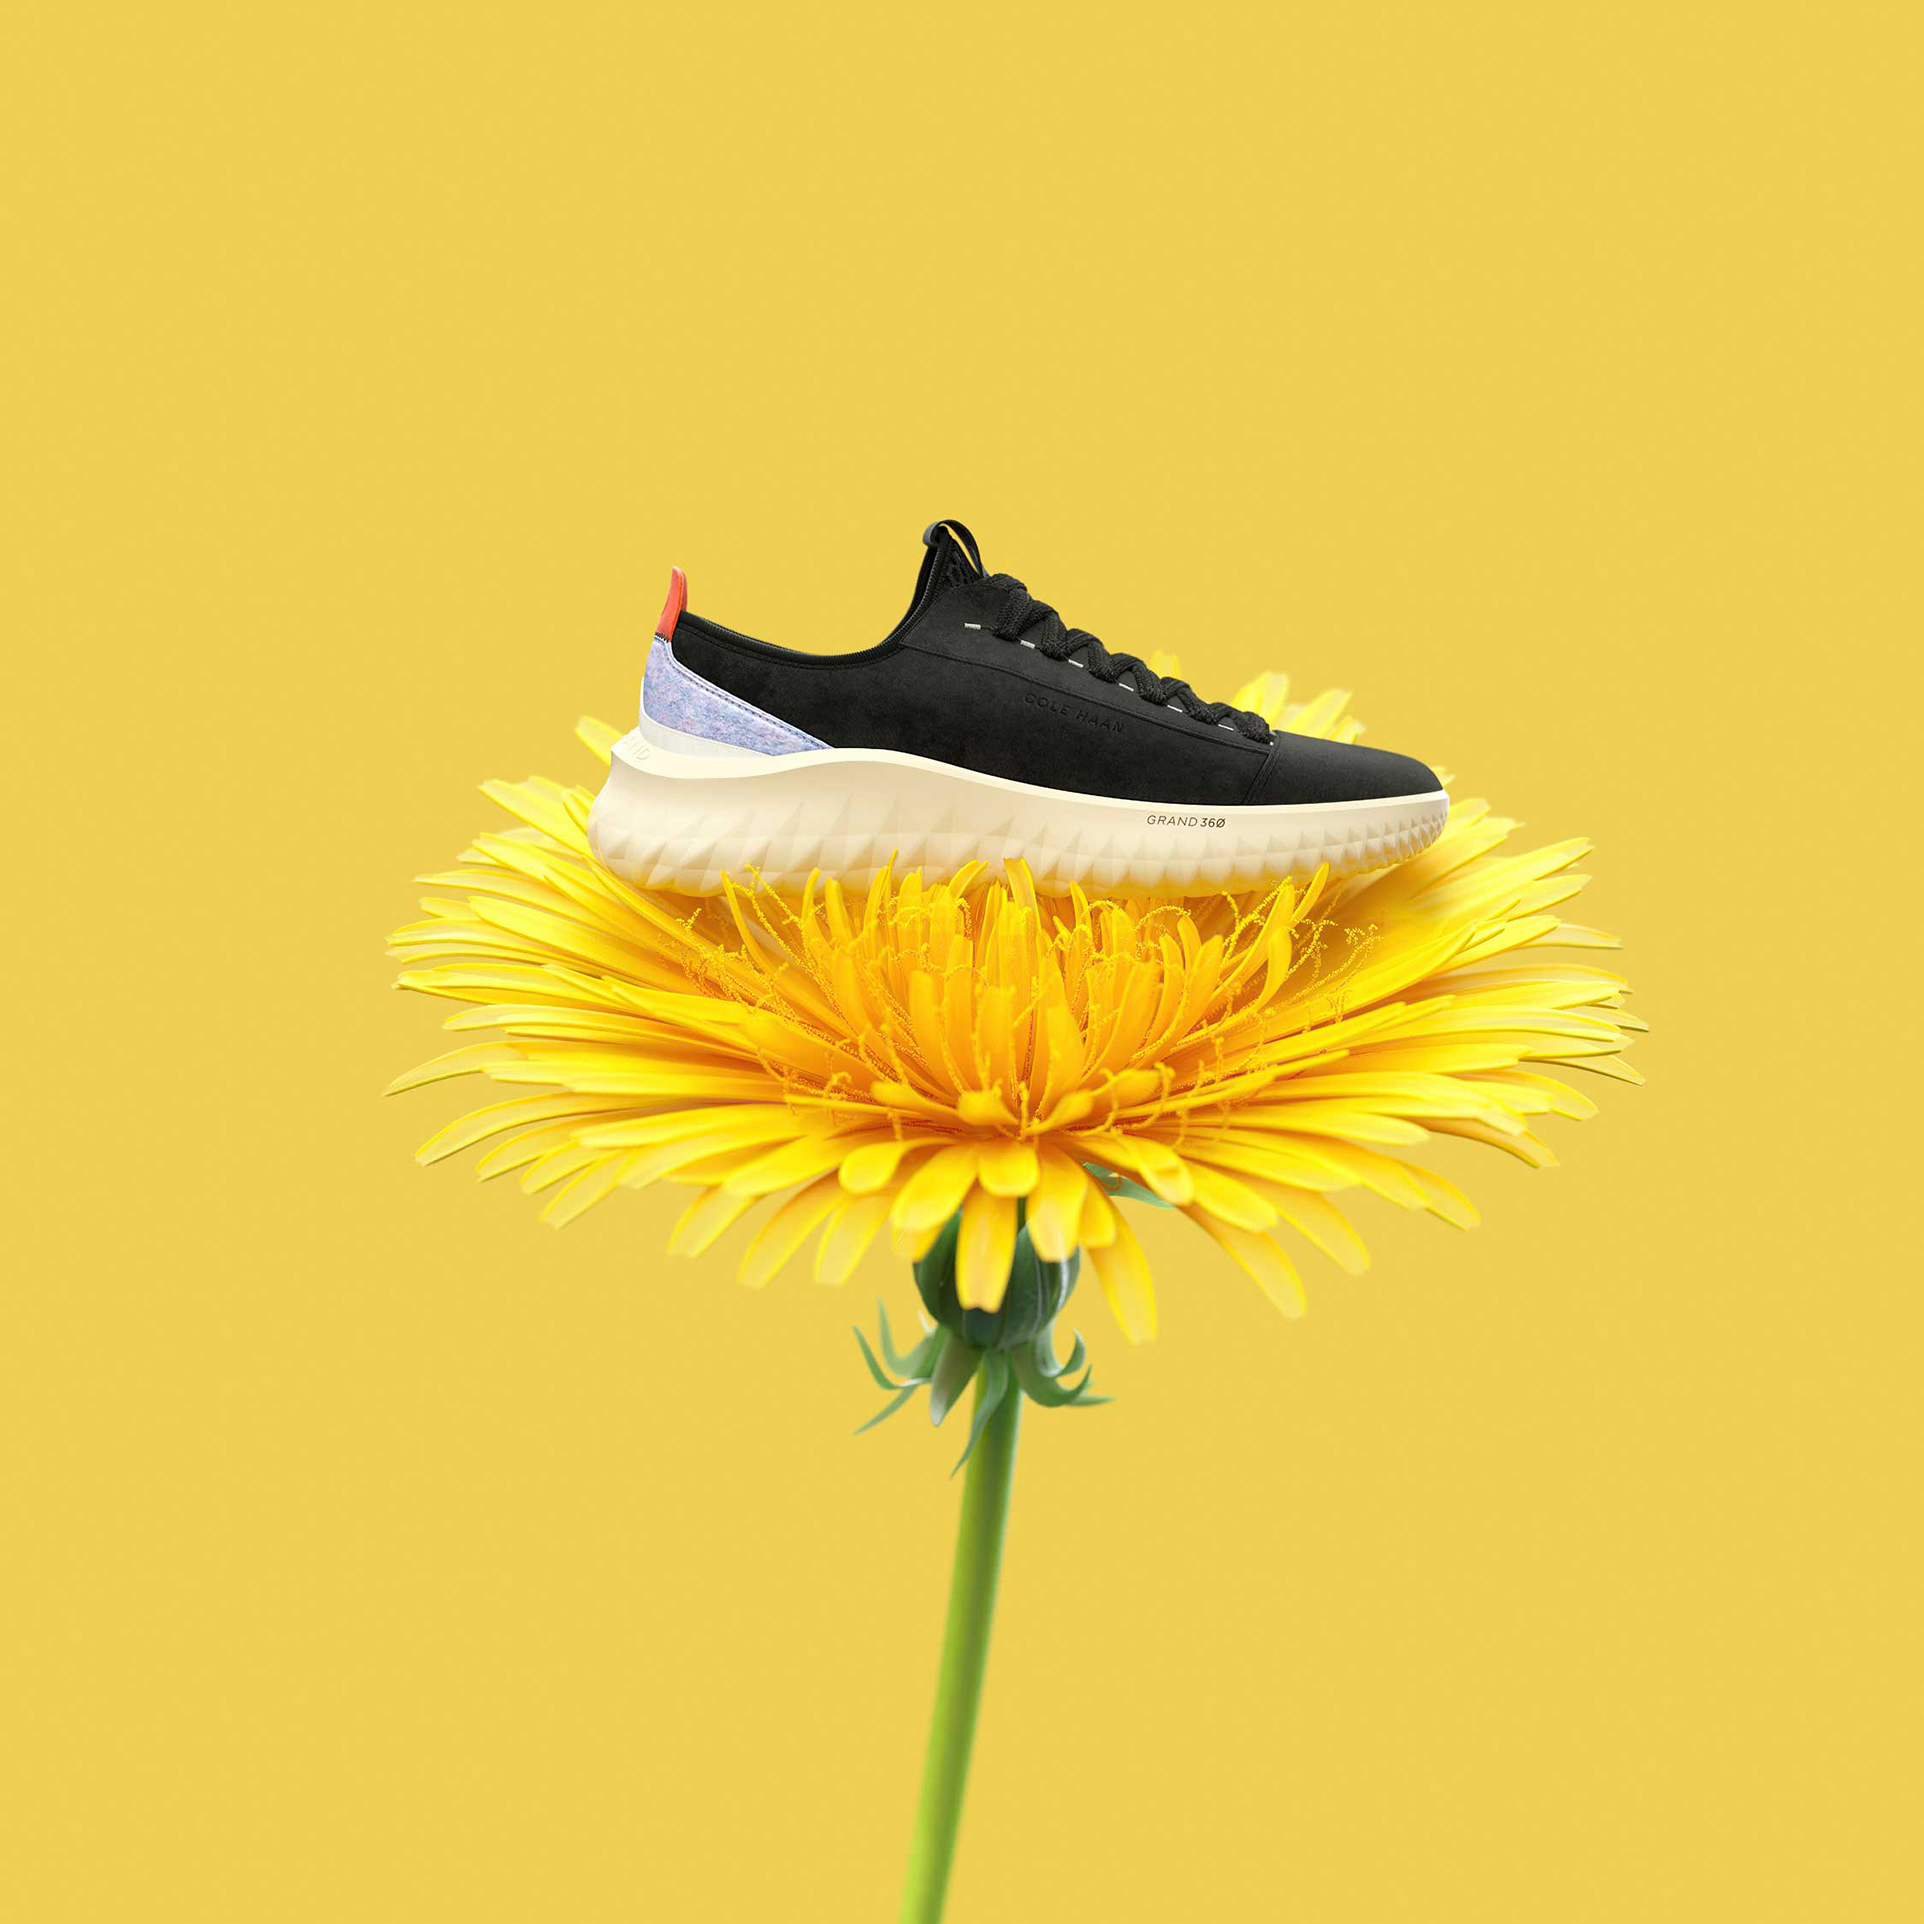 American brand Cole Haan launches pair of sustainable sneakers made from dandelion